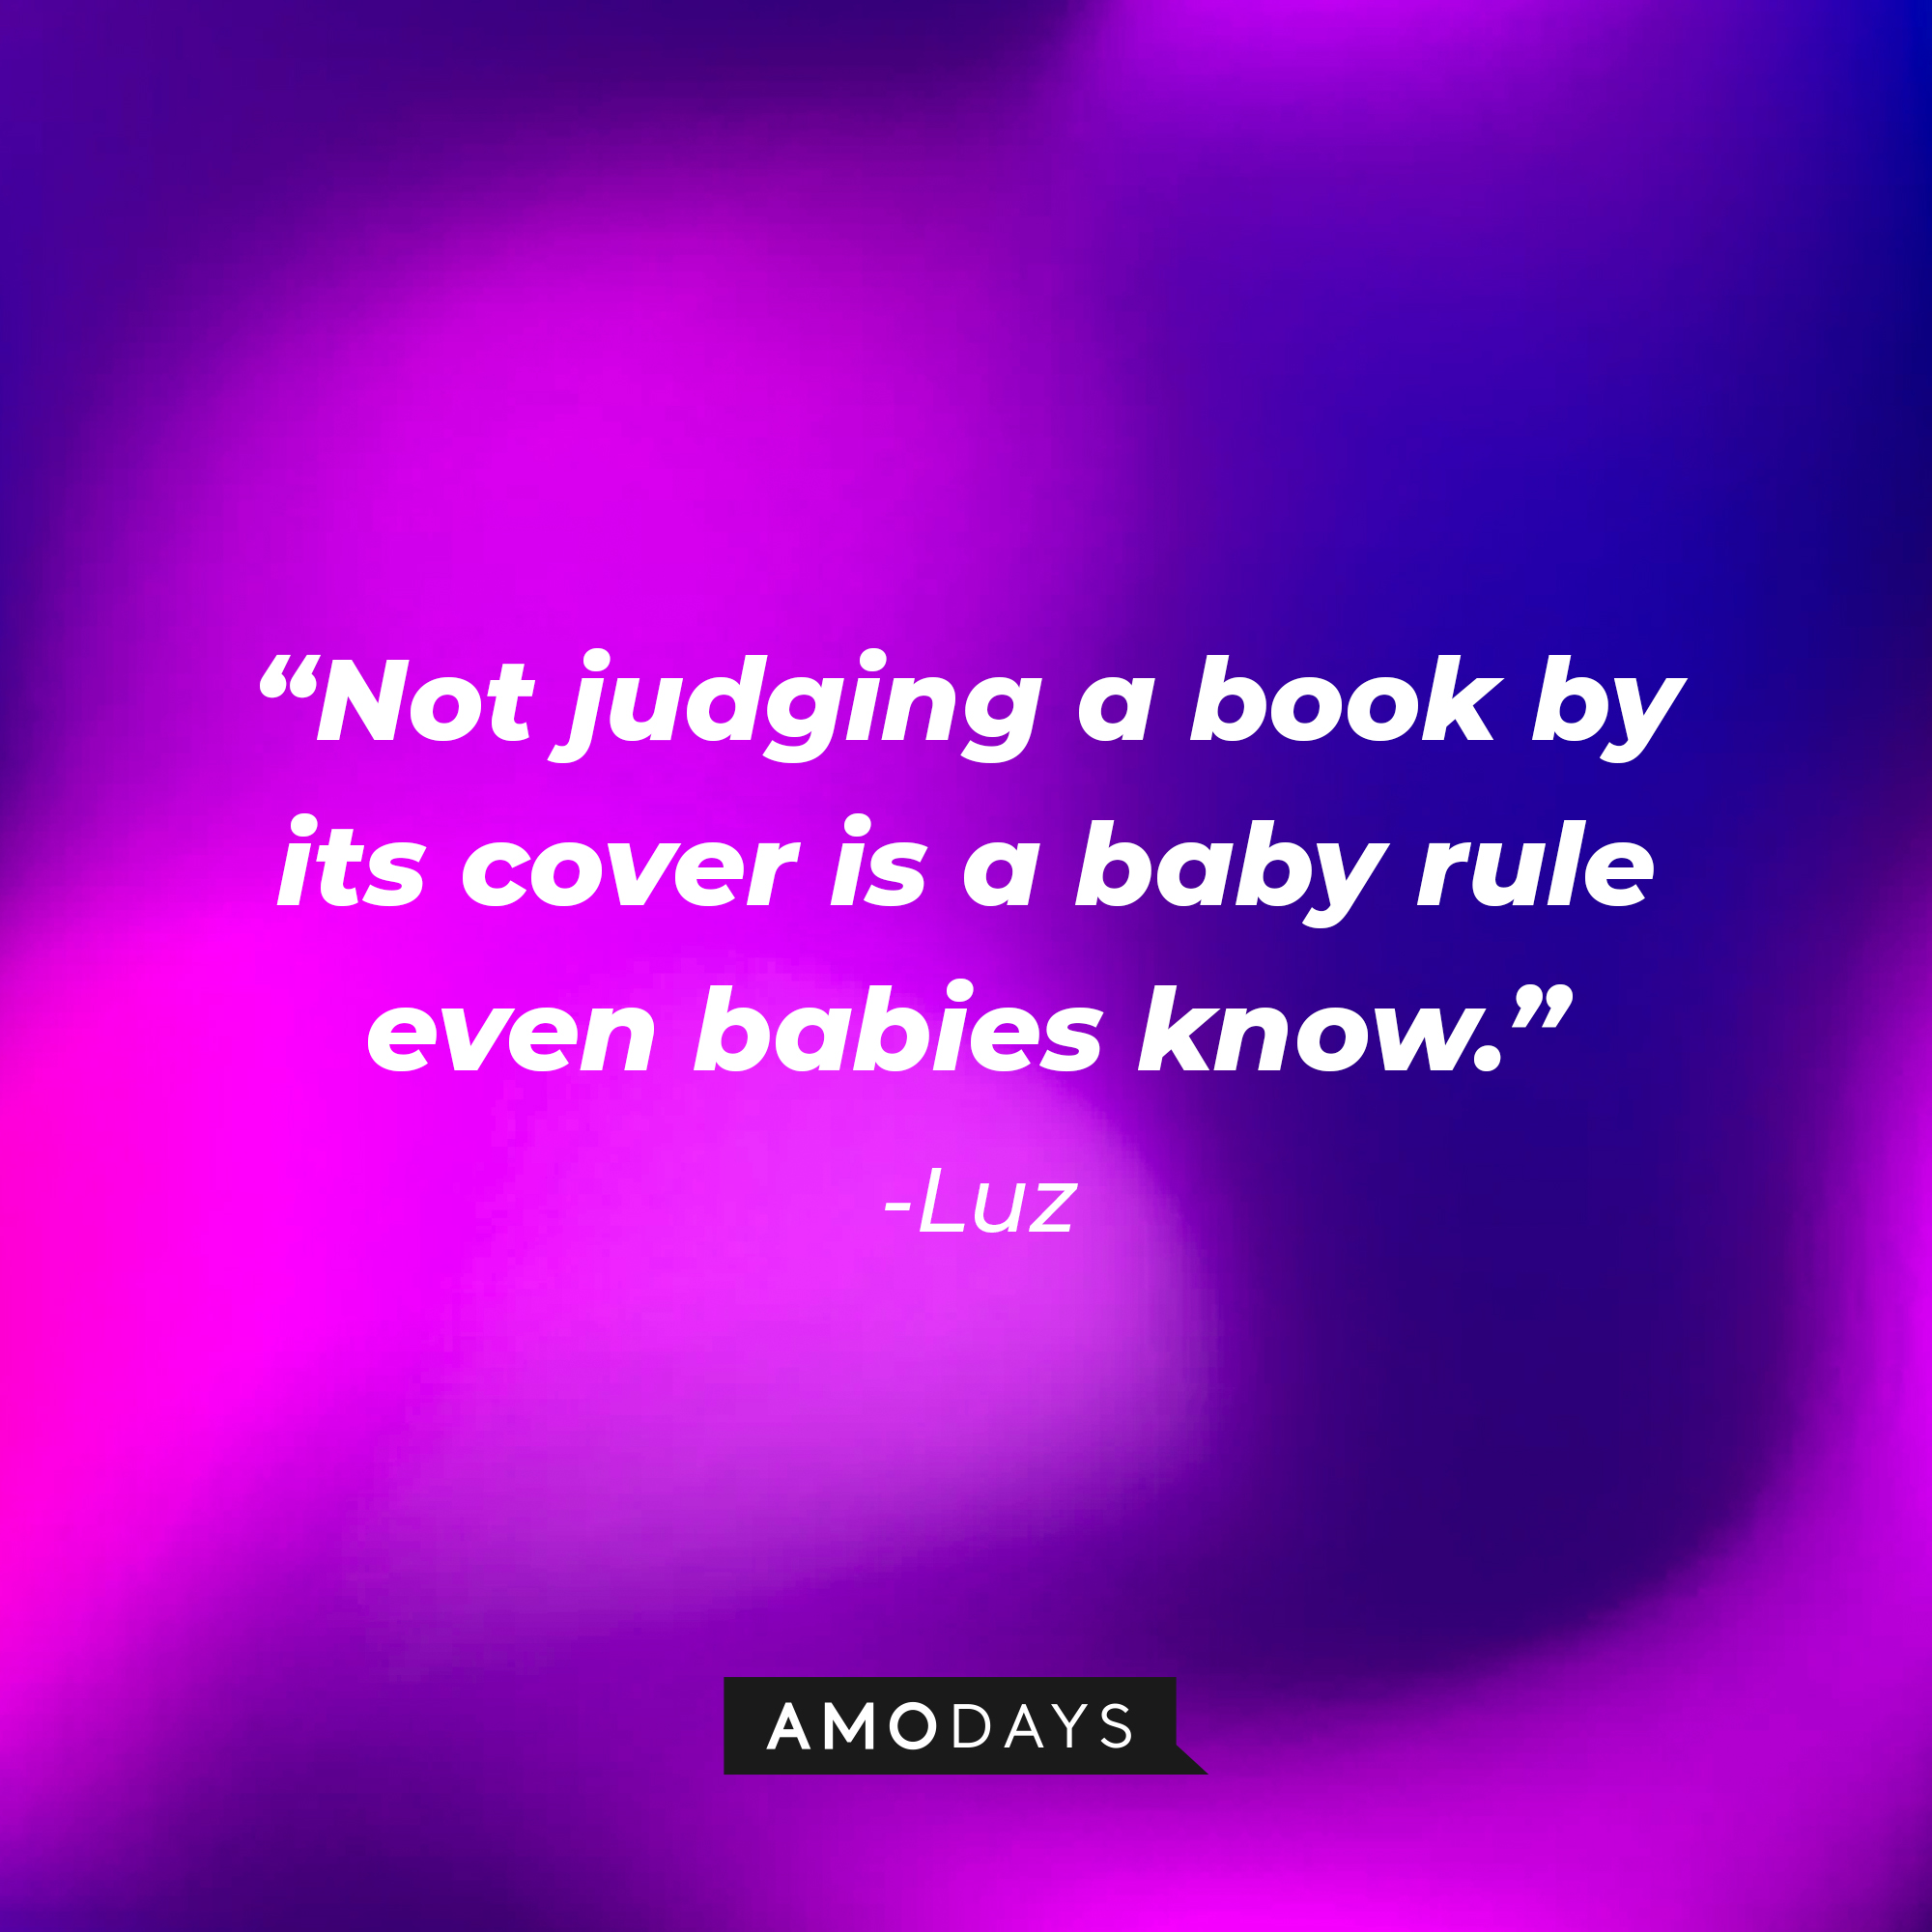 A photo with Luz's quote, "Not judging a book by its cover is a baby rule even babies know." | Source: Amodays